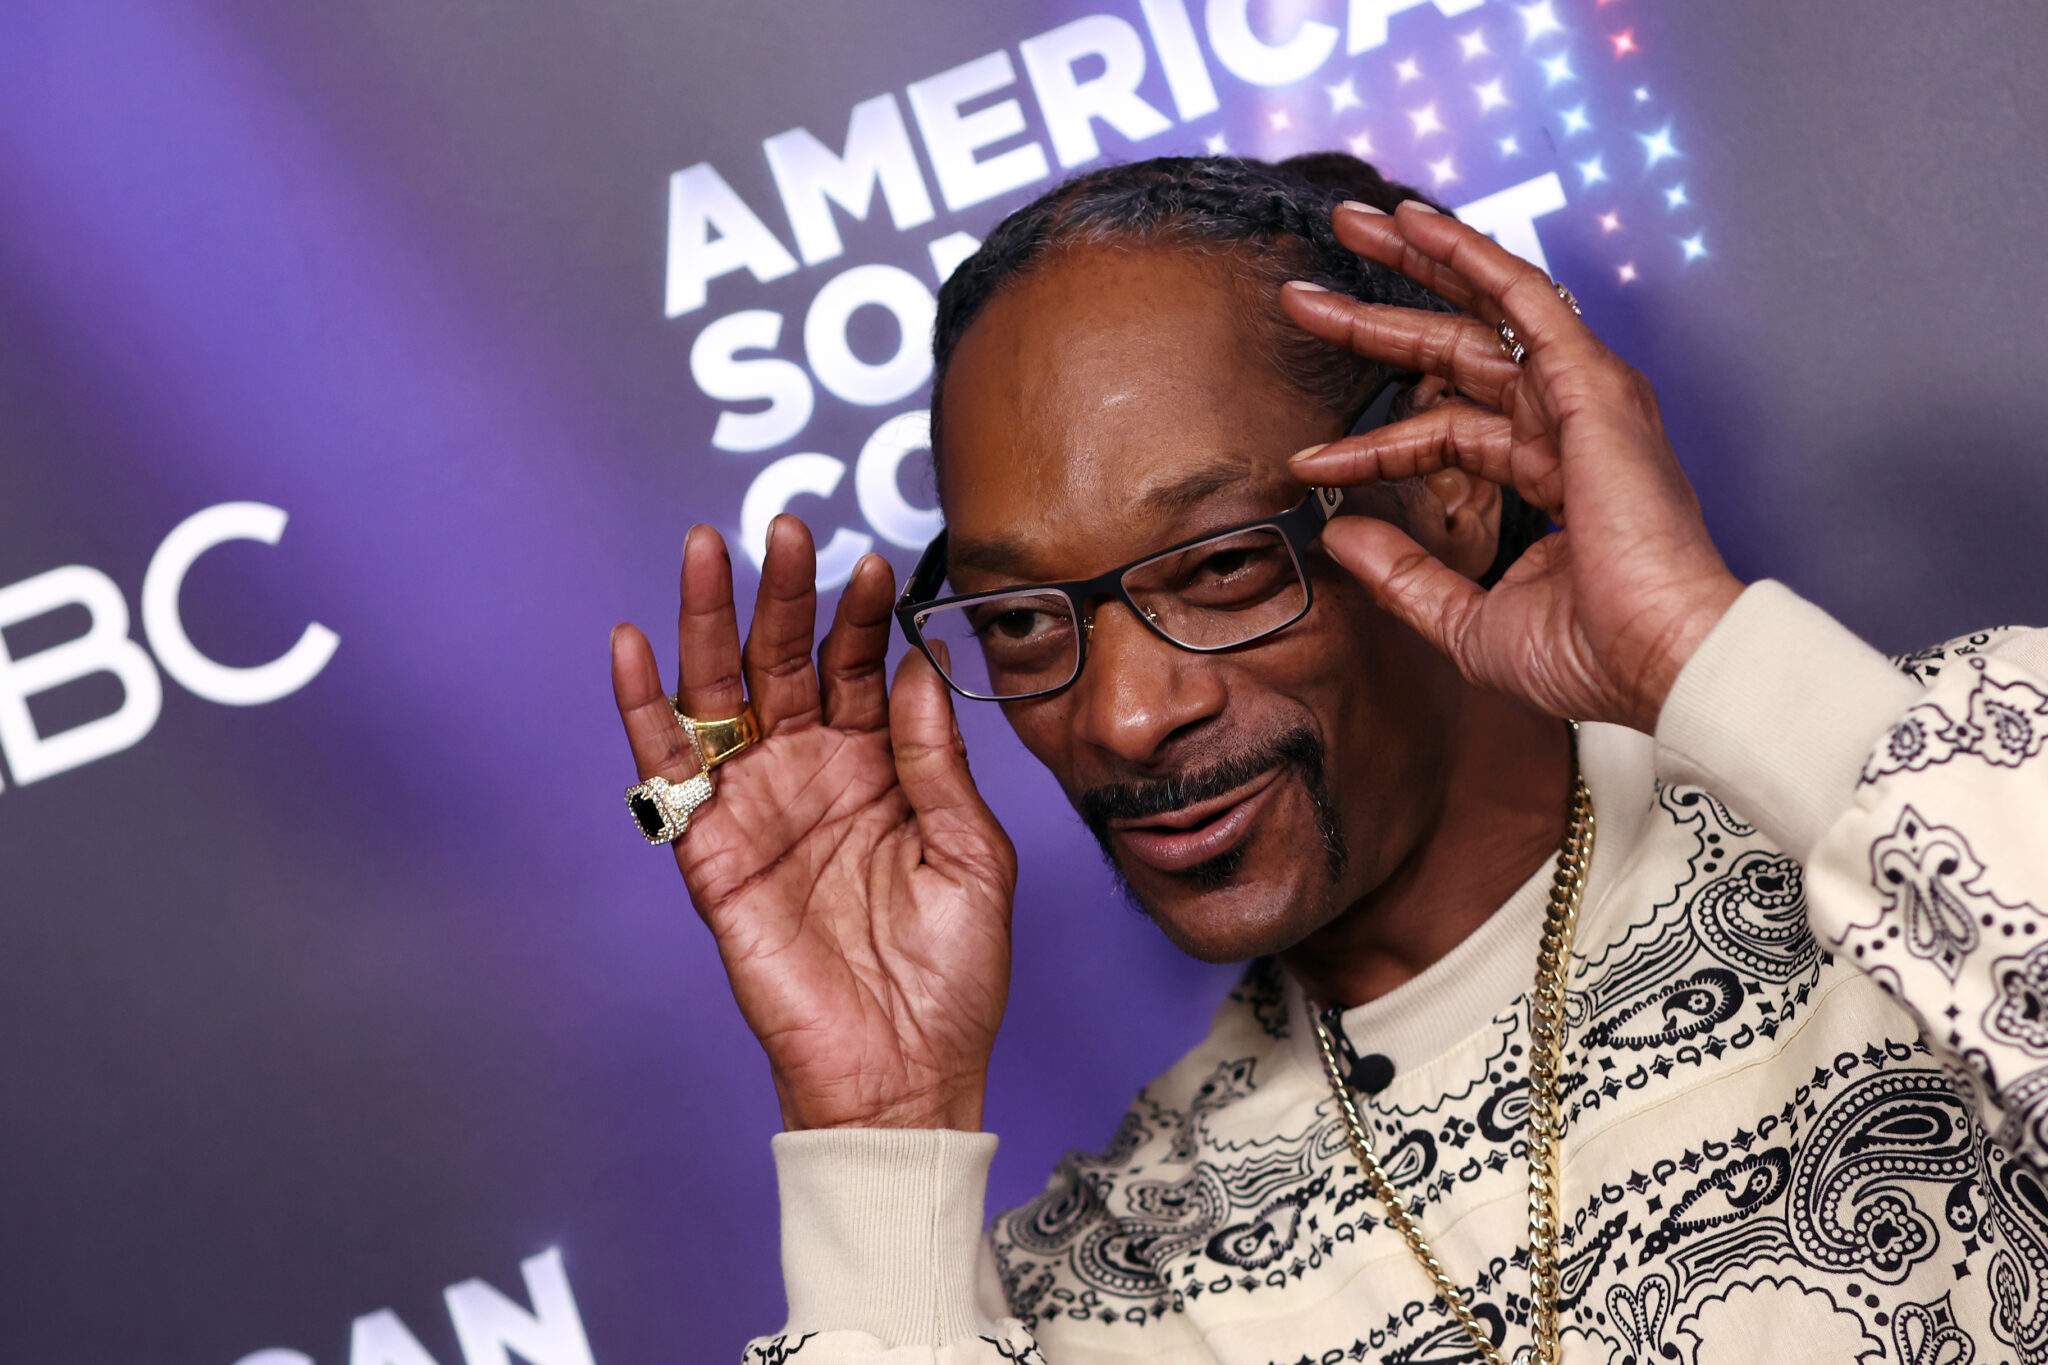 ‘I’m Suge Knight and Puff Daddy’: Snoop Dogg Teases Collab with Death Row and Bad Boy Records